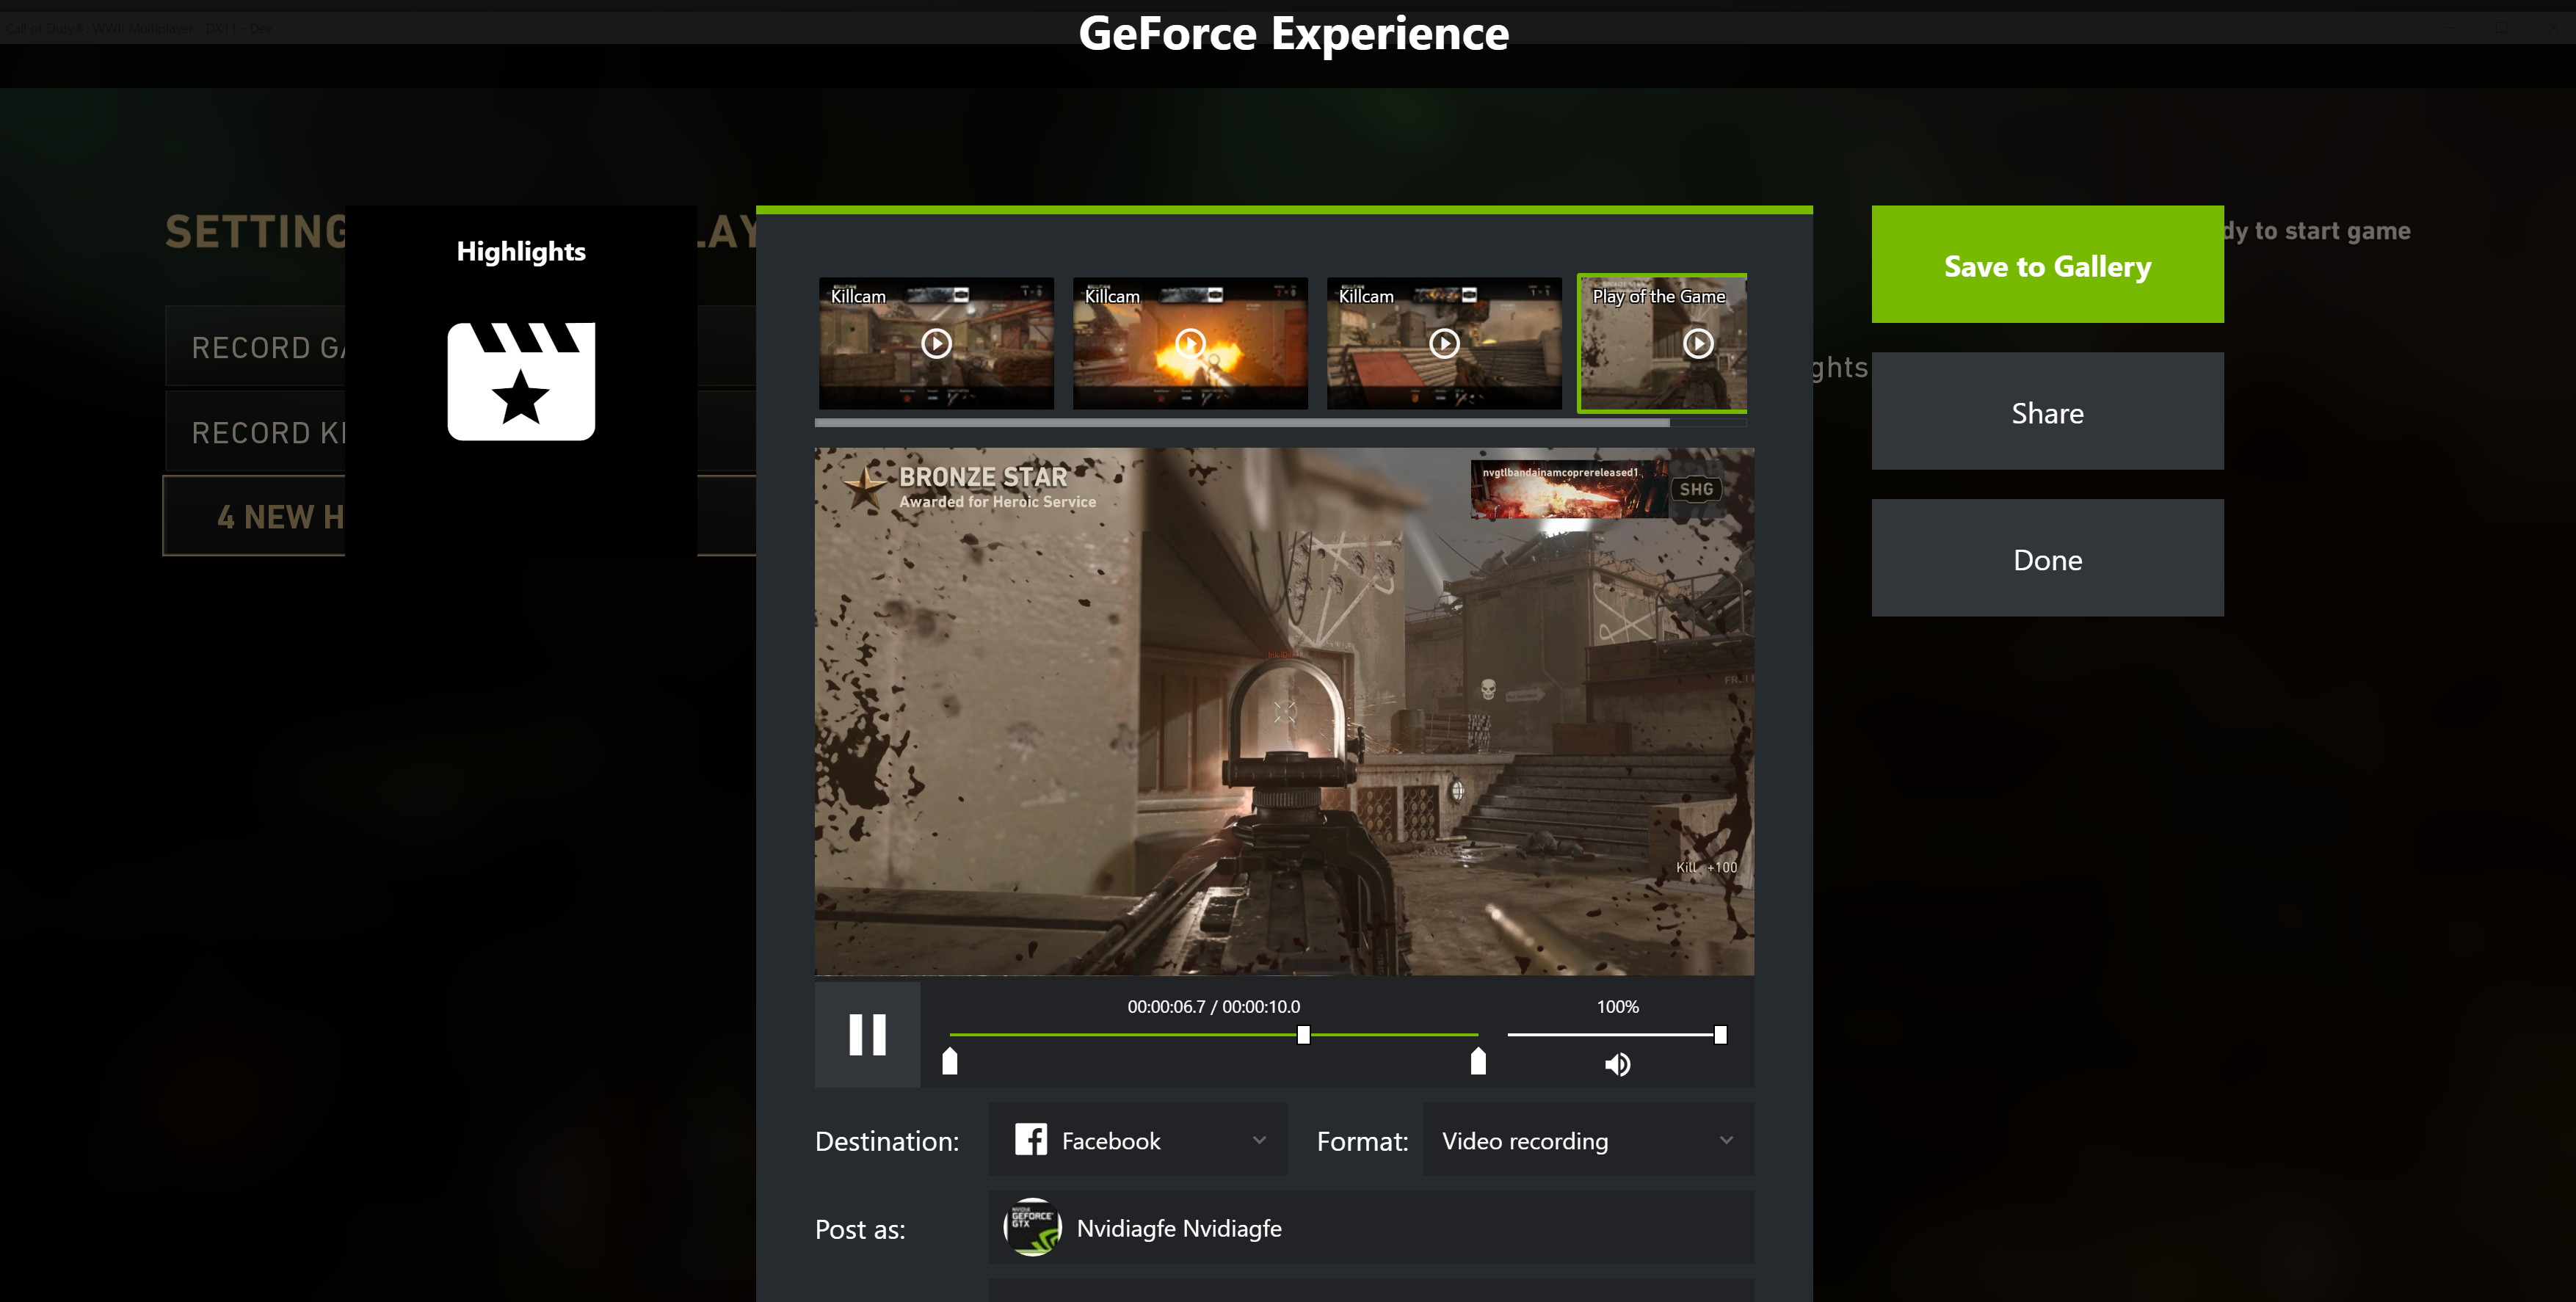 GeForce Experience At GDC 2018: All The News | GeForce - 3509 x 1774 png 2311kB